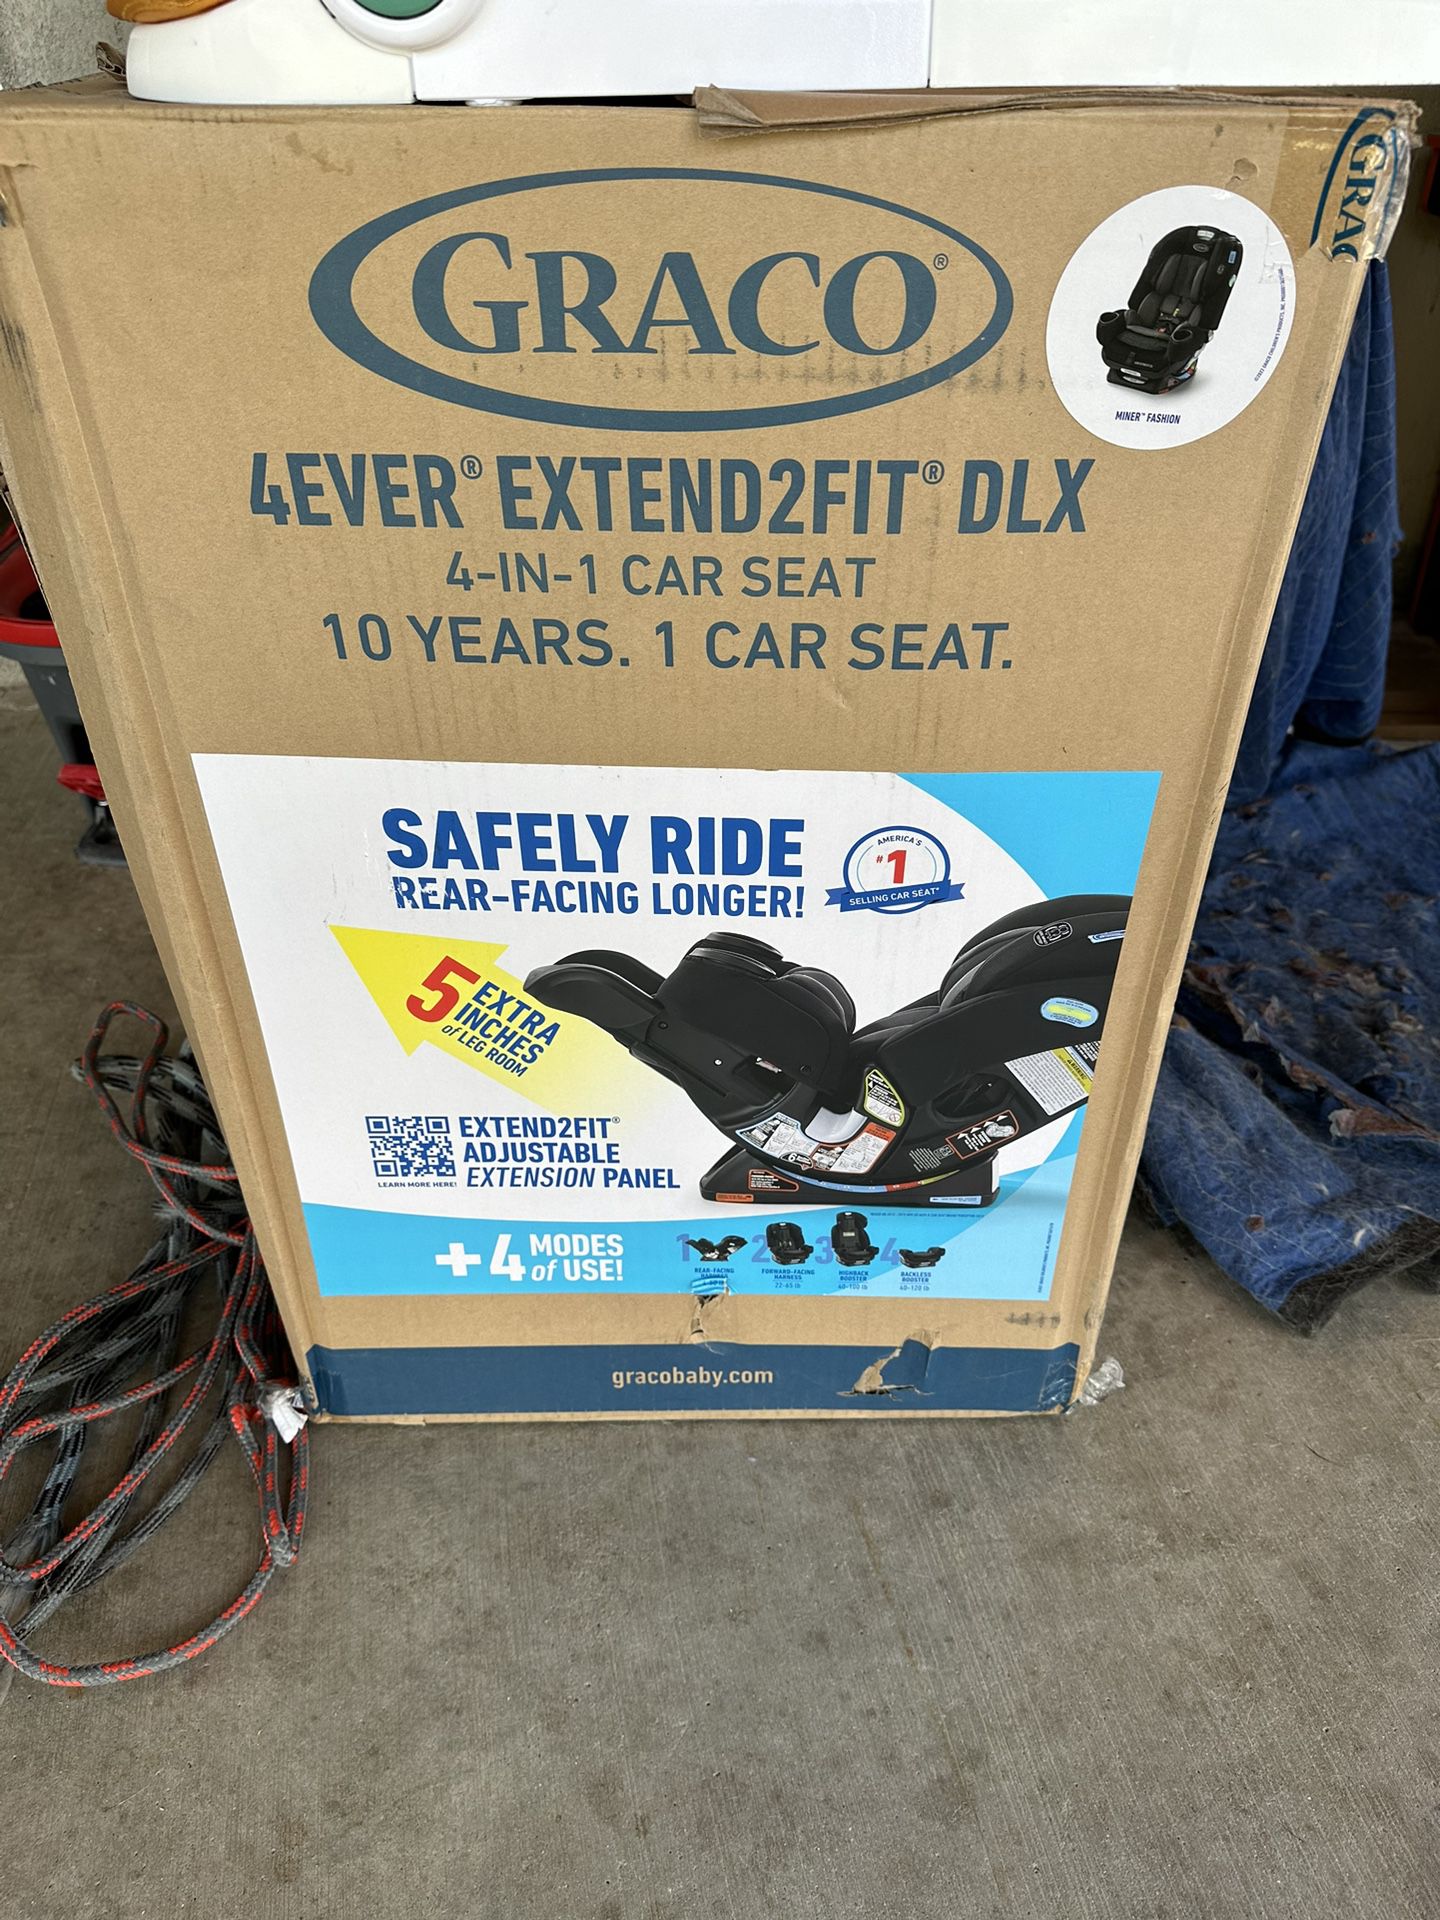 New Graco 4 In 1 Car seat Extreme 2 Fit 